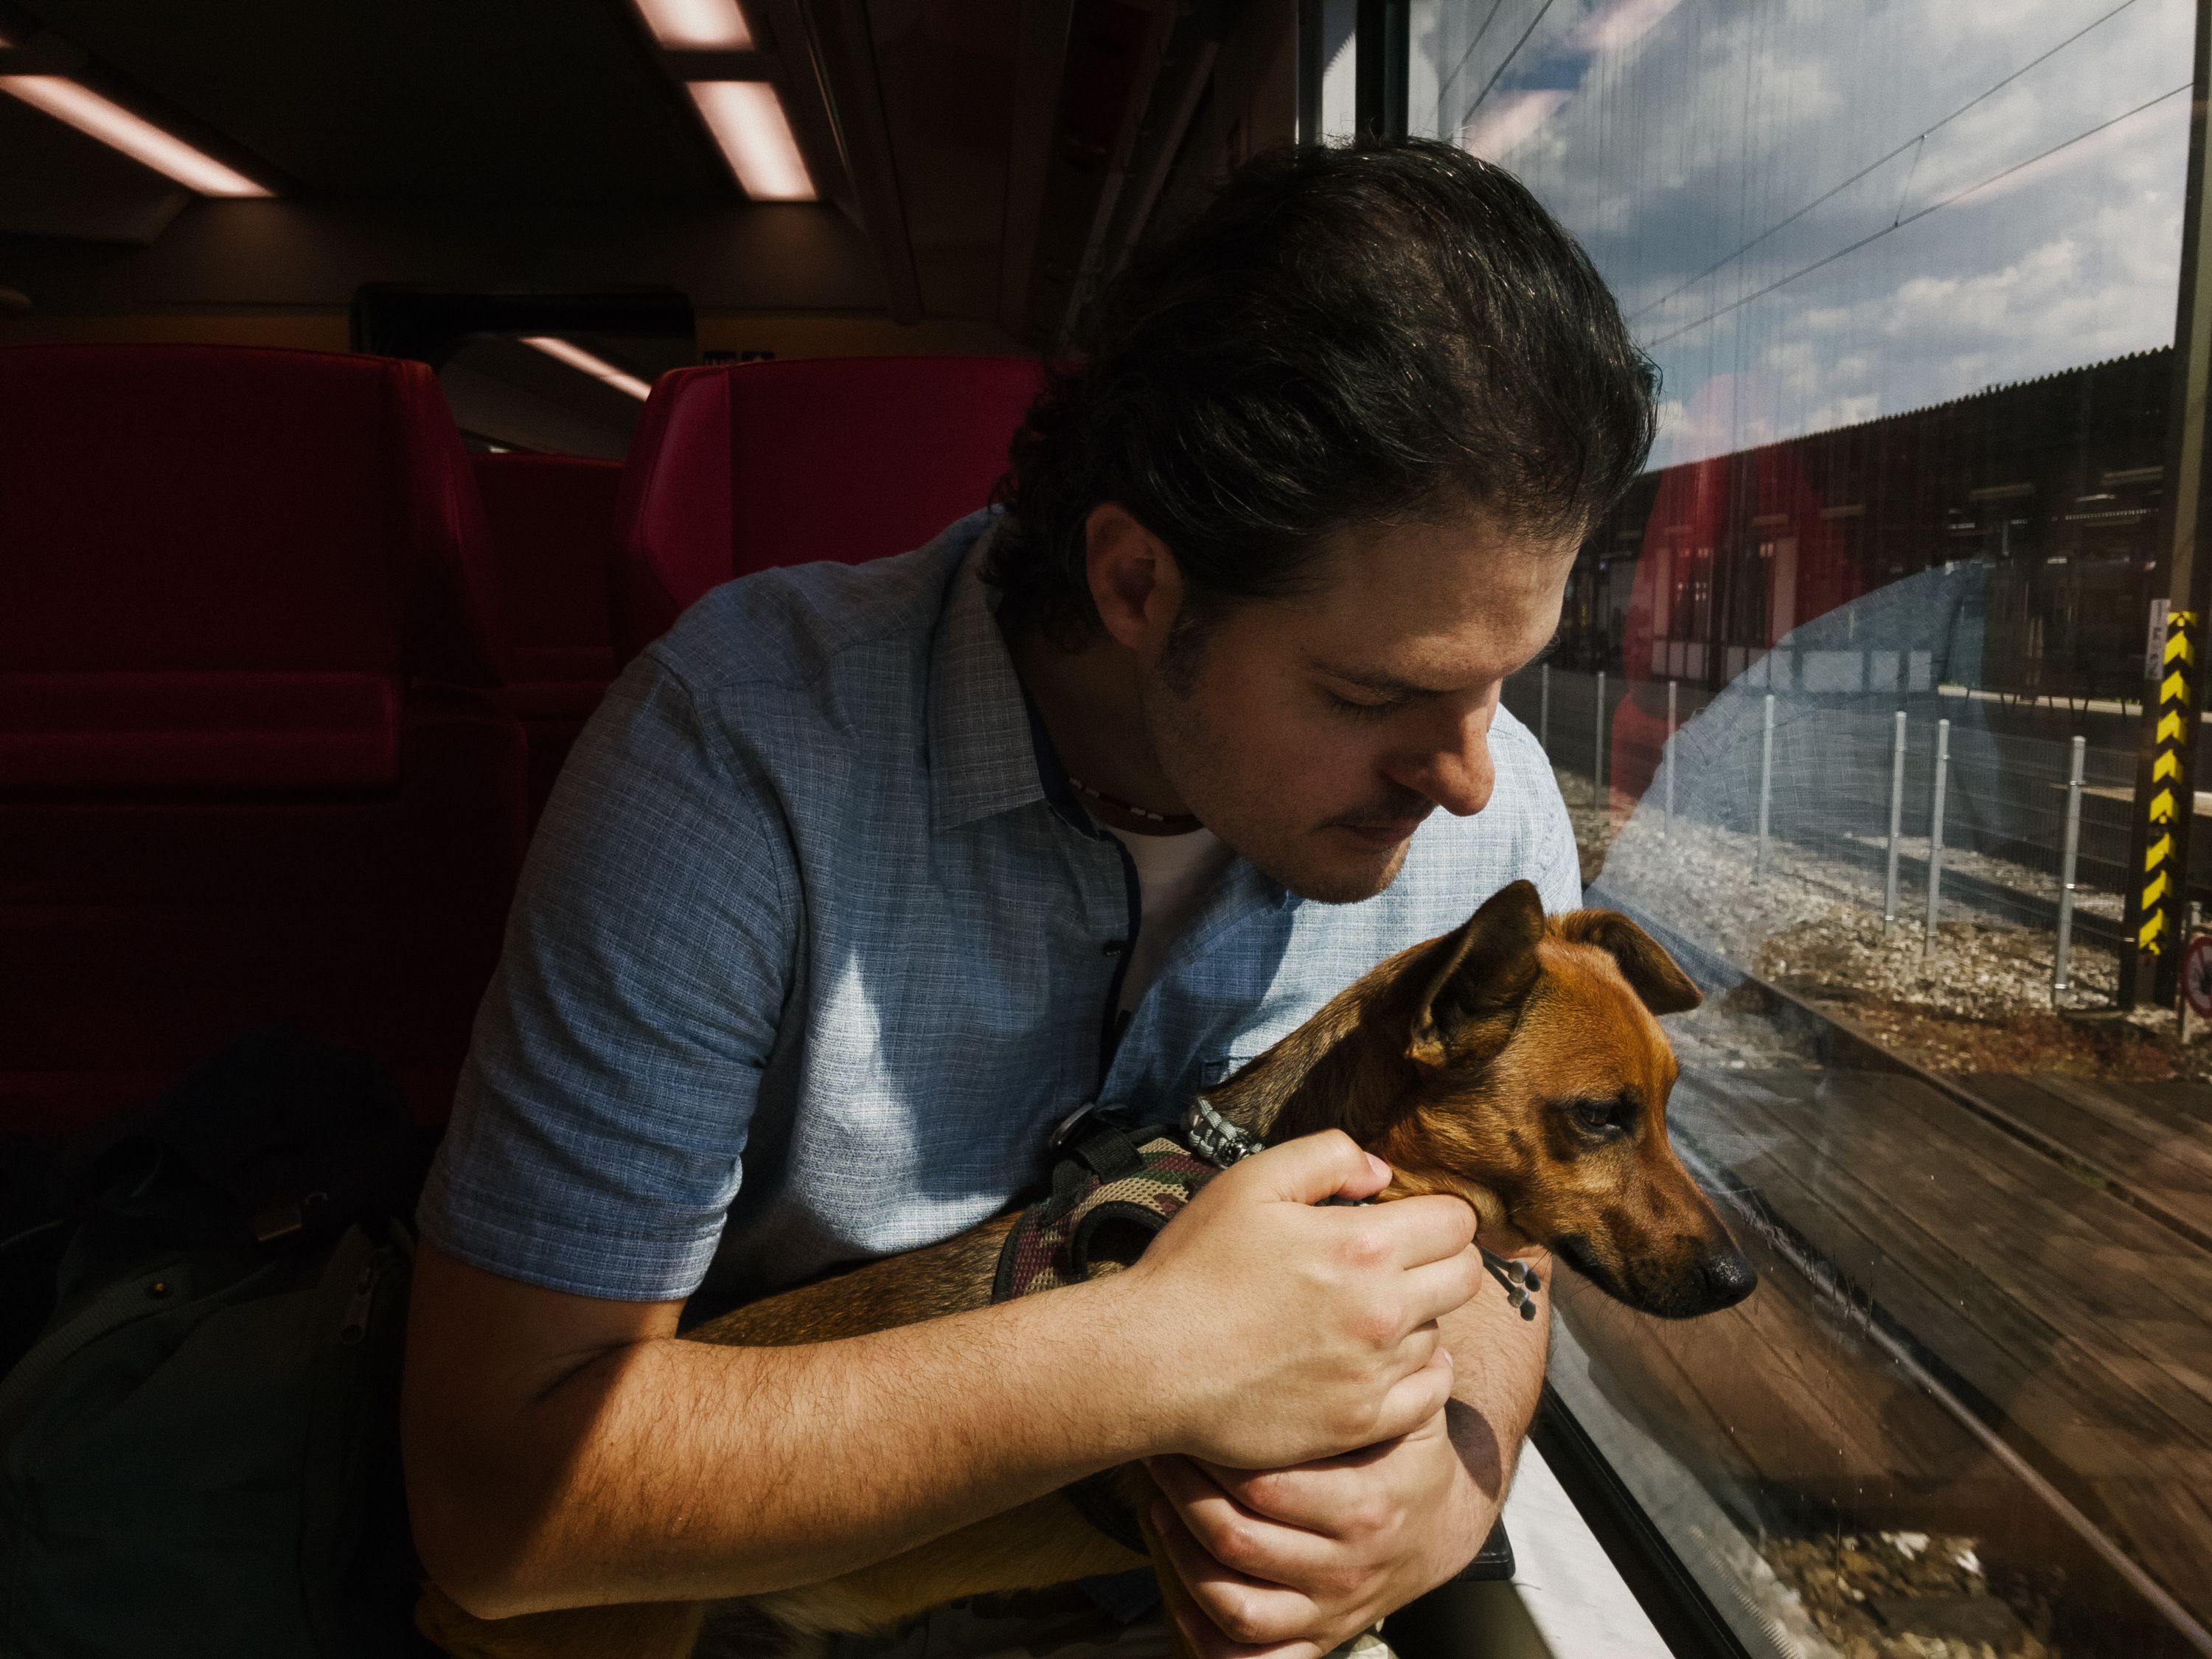 <p>If cars and airplanes aren’t going to work for your situation, then you may want to consider traveling by train. For instance, <a href="https://www.amtrak.com/pets">Amtrak allows you to travel with pets </a>under 20 pounds if you keep them in a carrier for just $26 or 800 rewards points.</p>